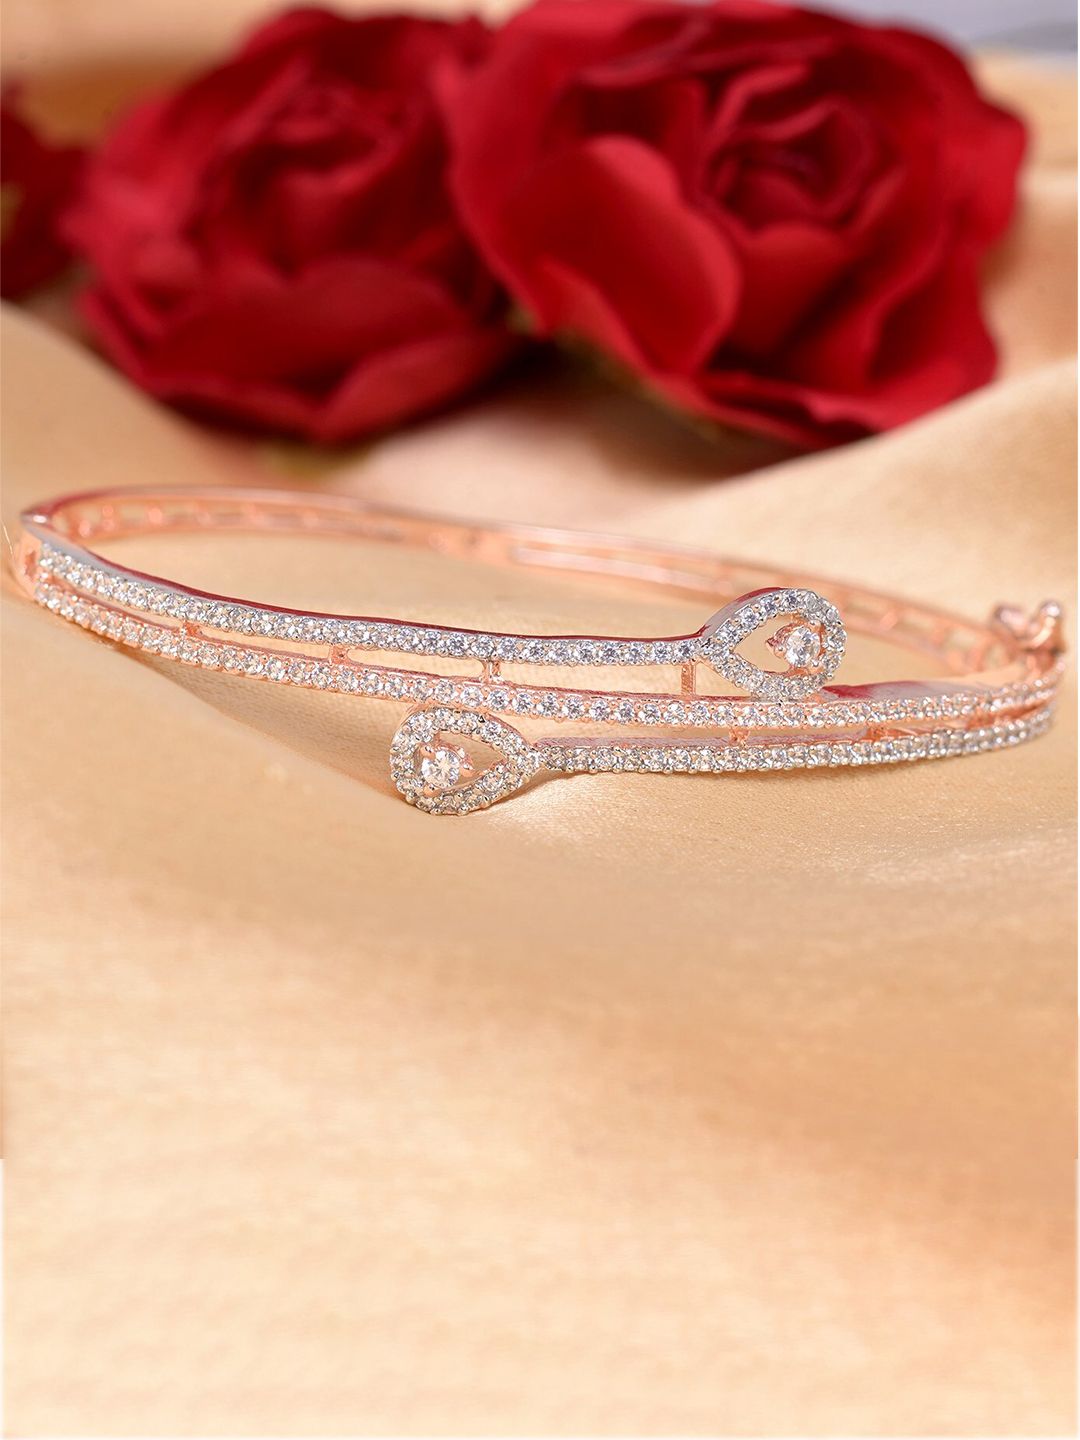 Saraf RS Jewellery Rose Gold-Plated Handcrafted Kada Bracelet Price in India